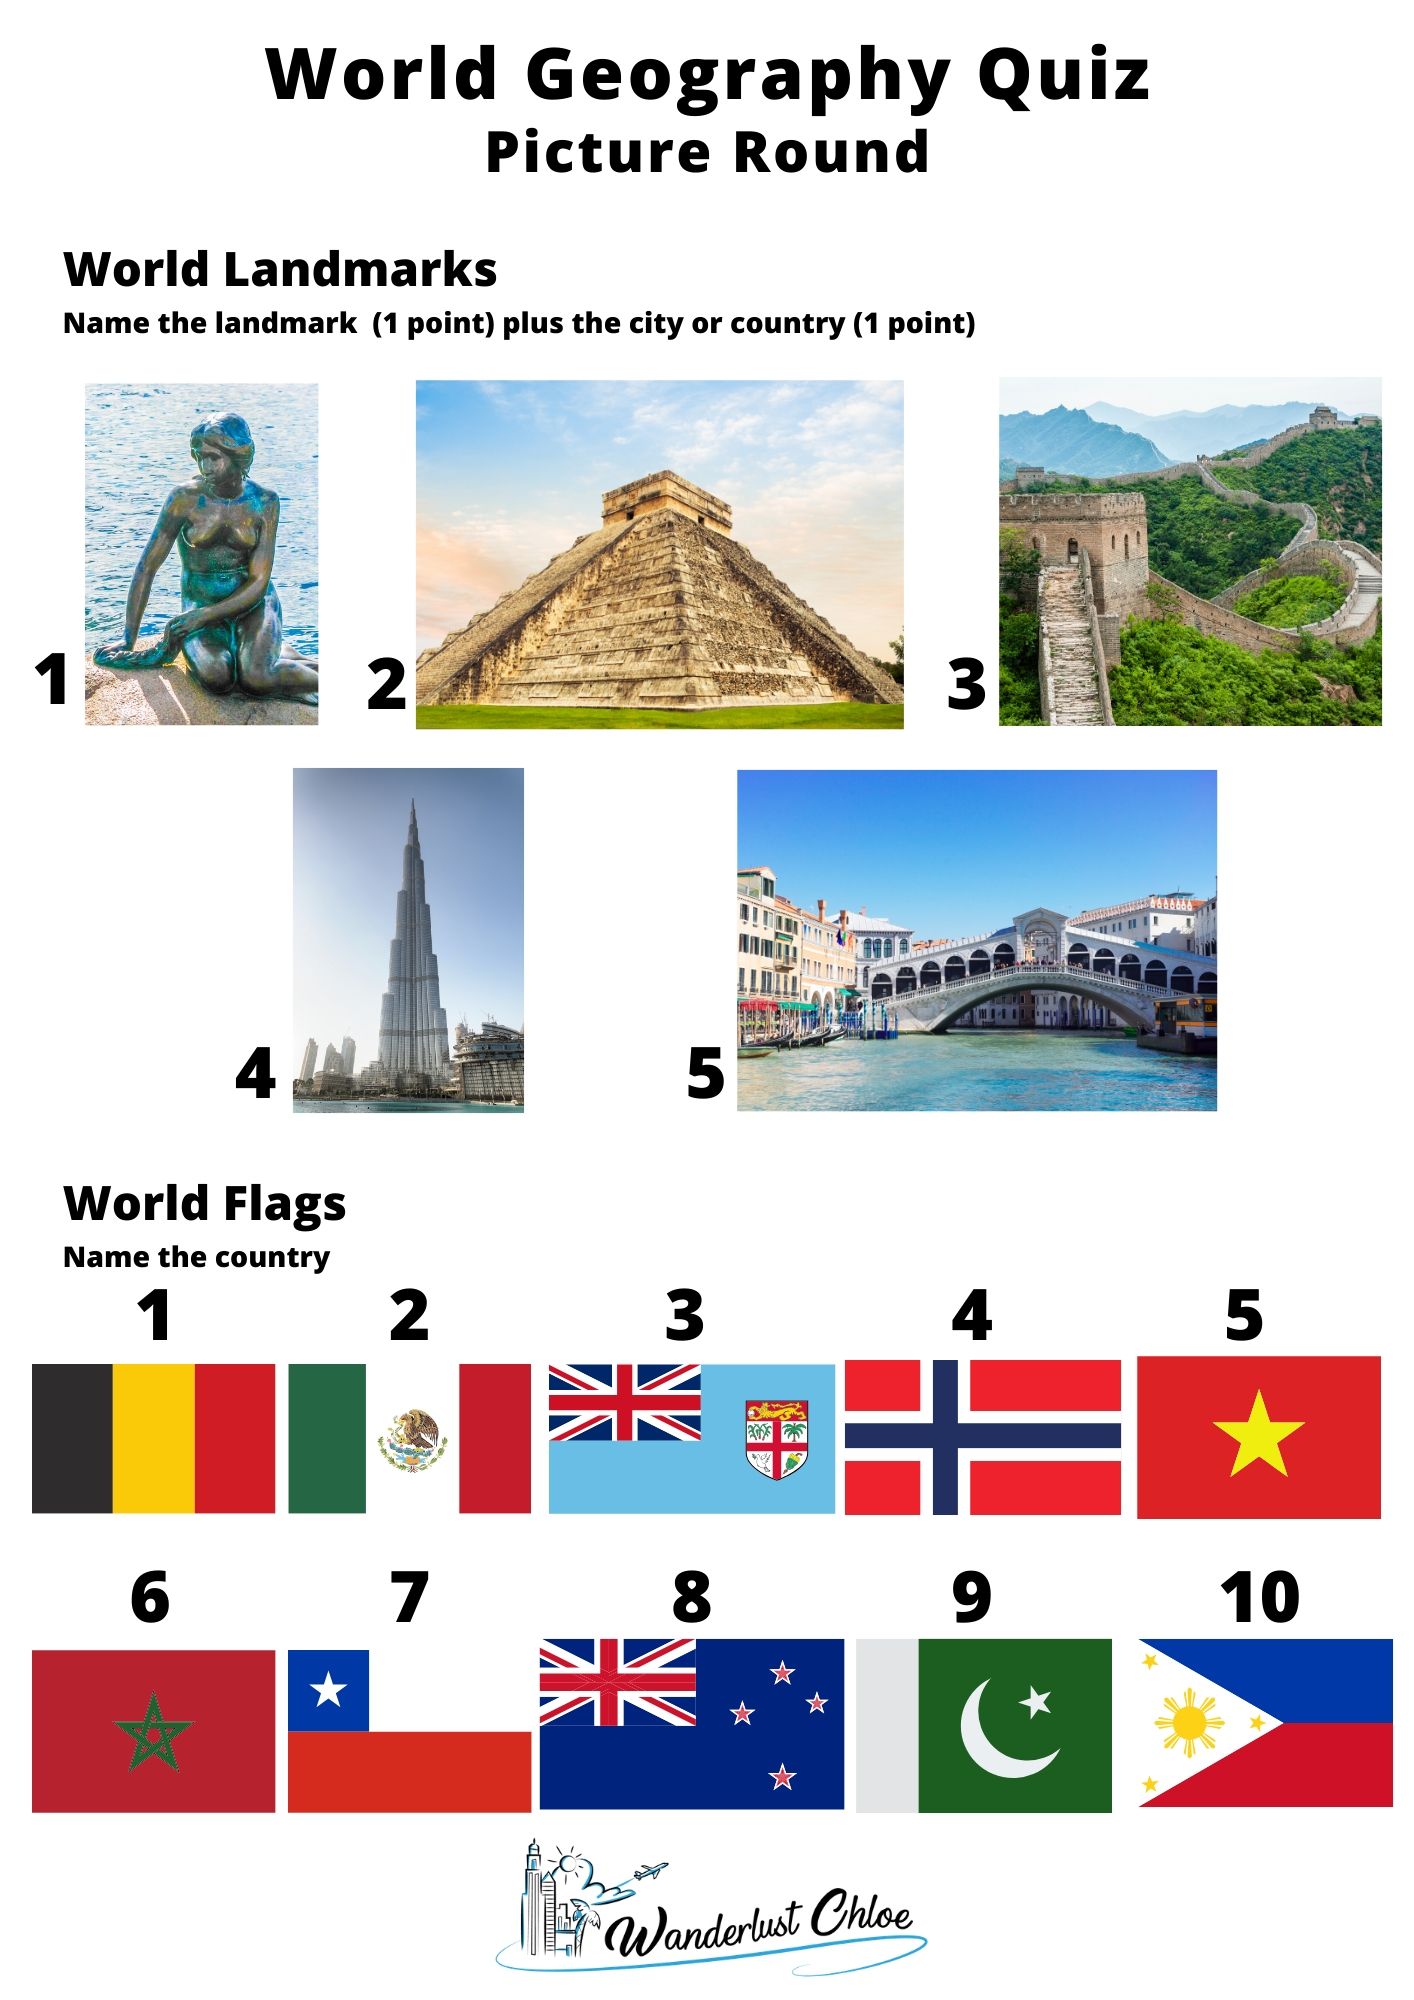 World geography quiz printable - picture round